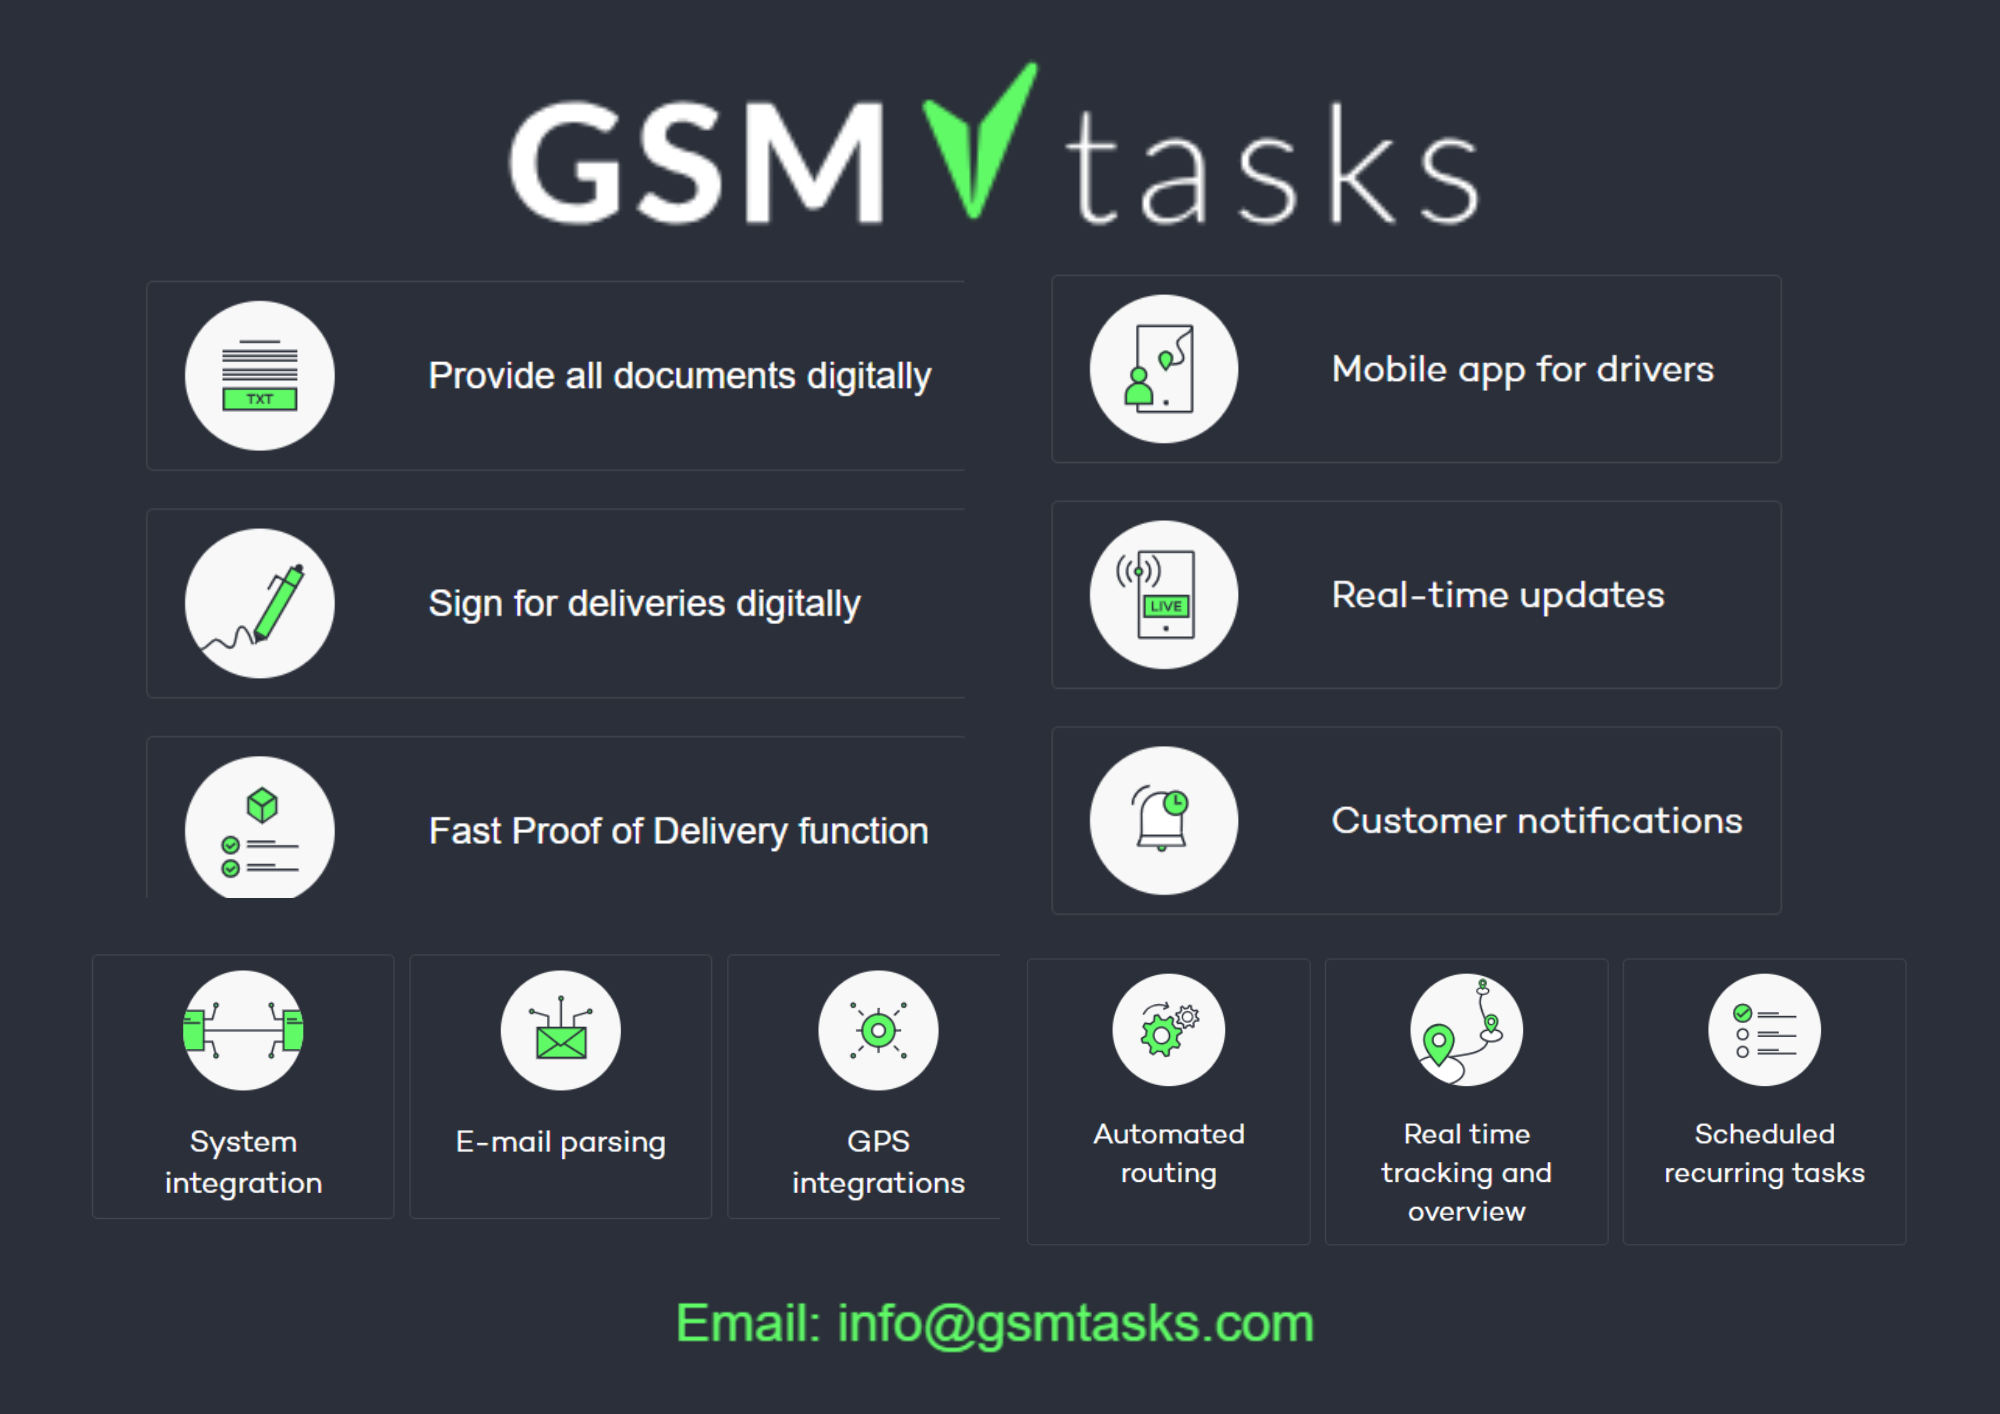 GSMtasks Software - Our feautres make it as easy as possible to manage your workers and have higher levels of efficiency and productivity. From APIs to notifications to customers and more, we help you be more organized.